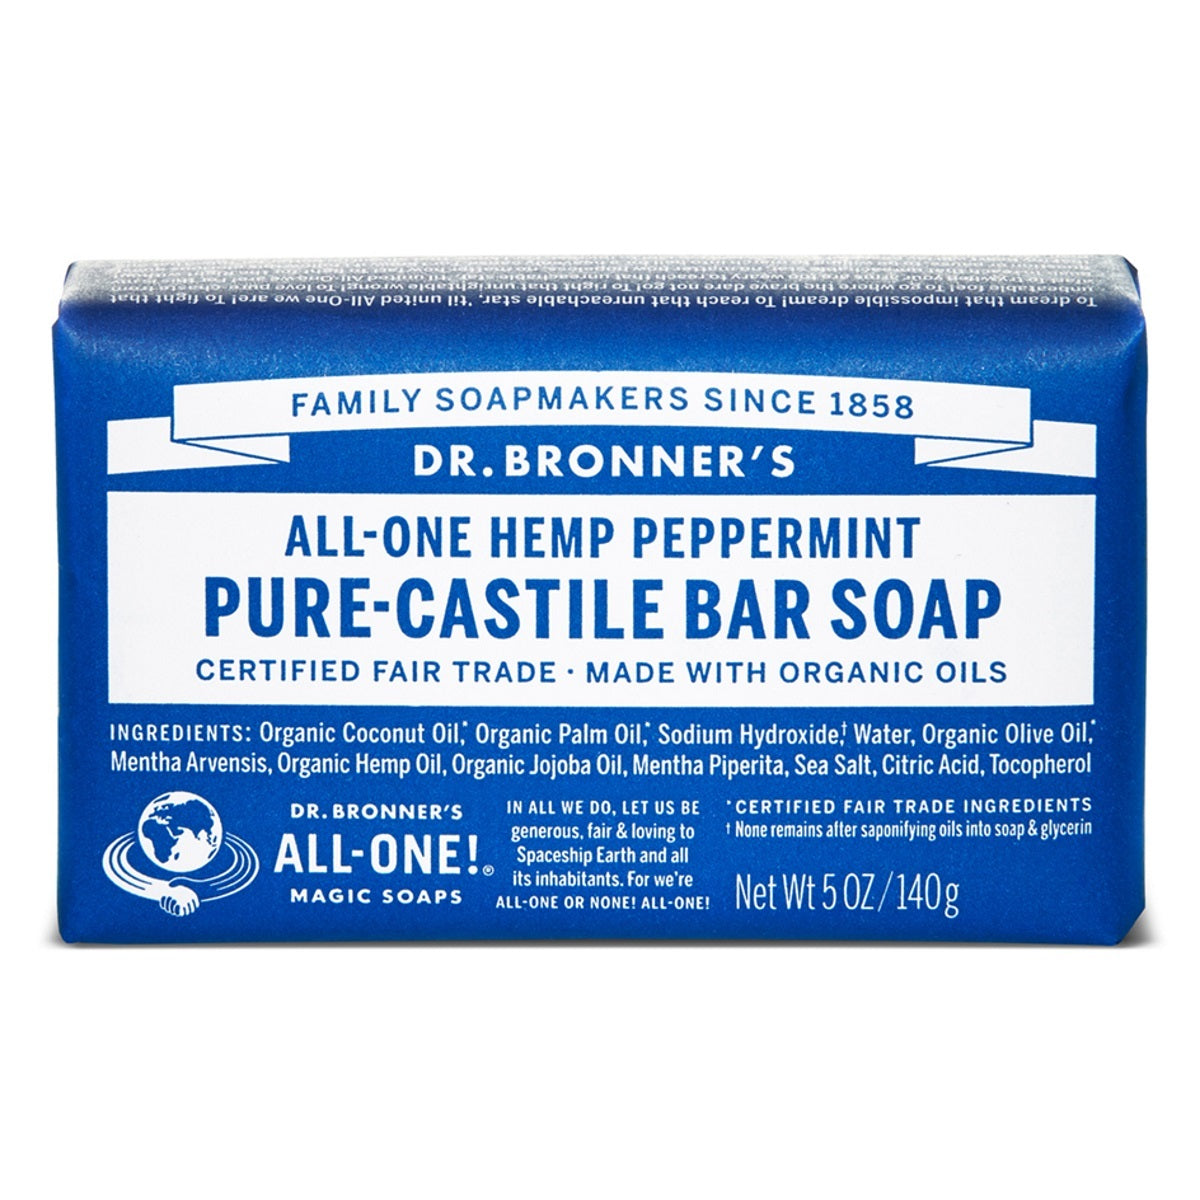 Primary image of Organic Peppermint Castile Bar Soap